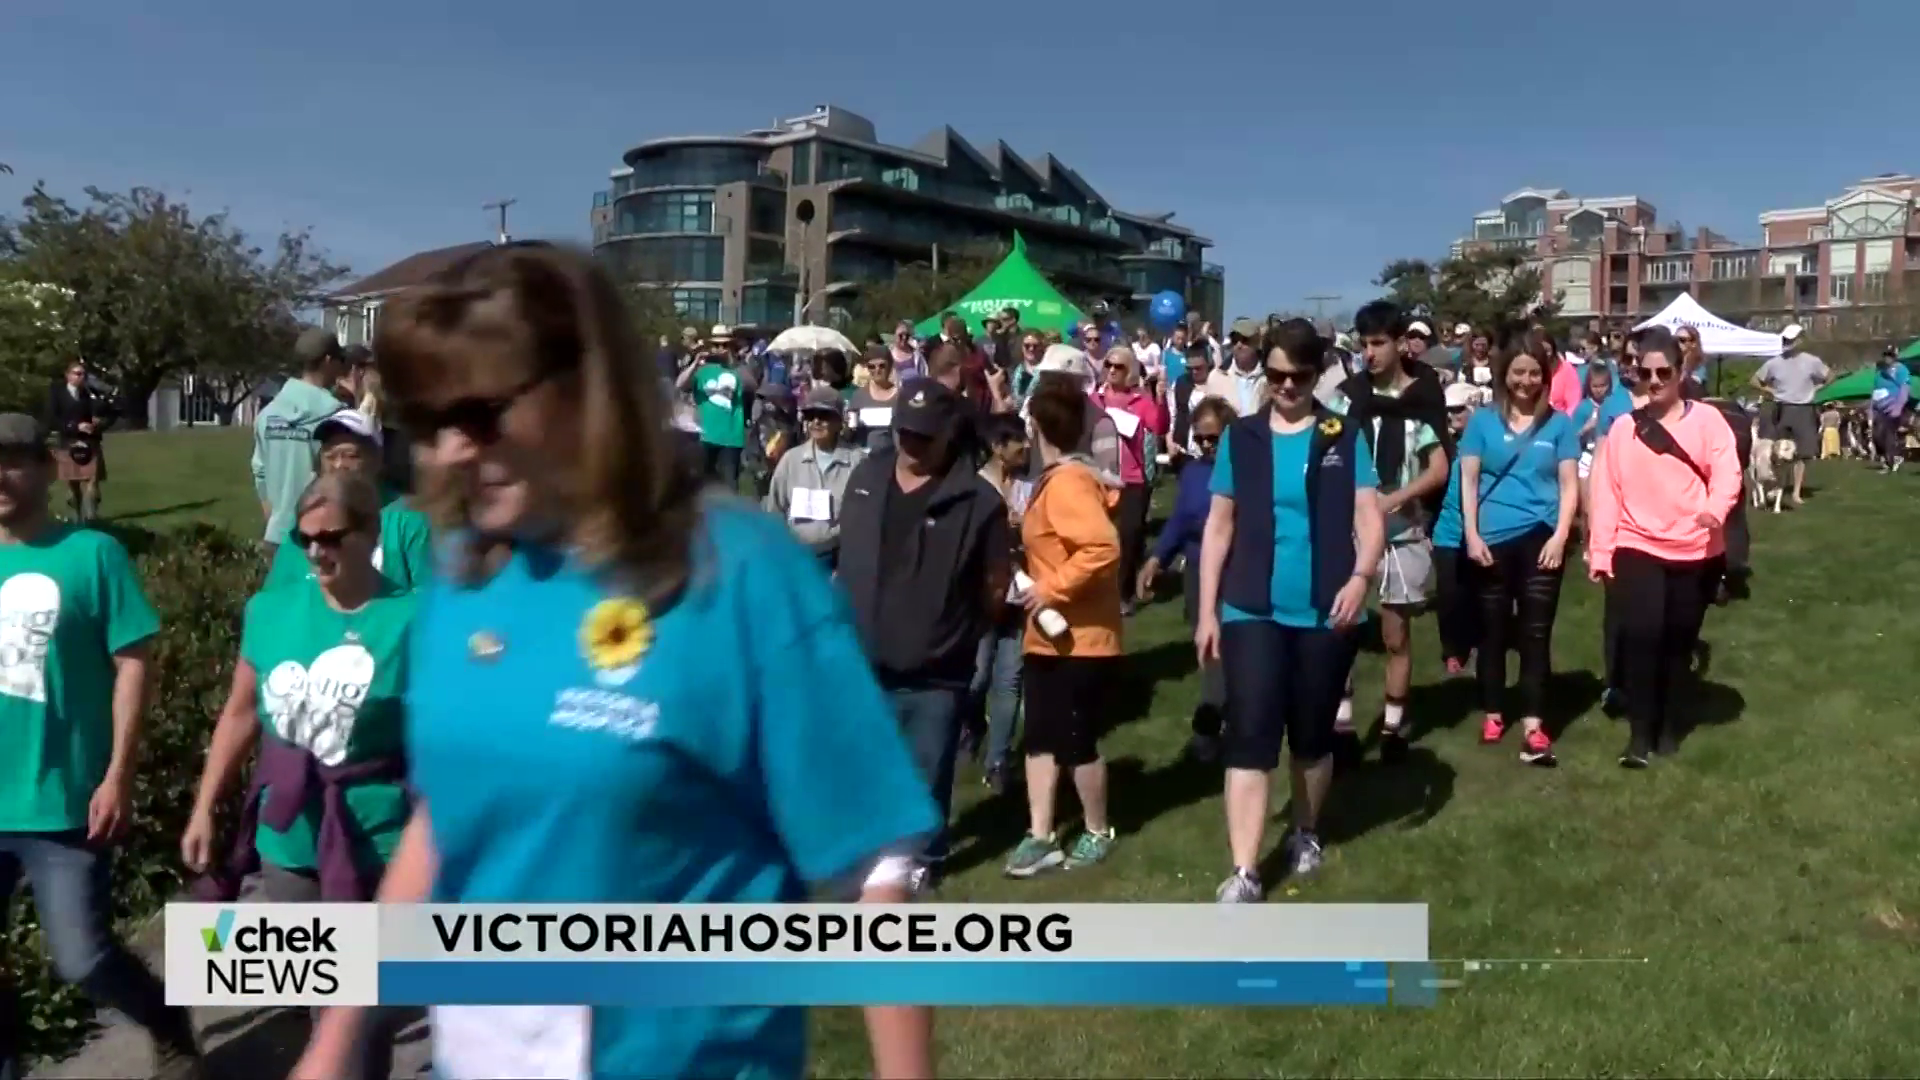 'Huge impact': Why the Hike for Hospice fundraiser for Victoria Hospice needs your support